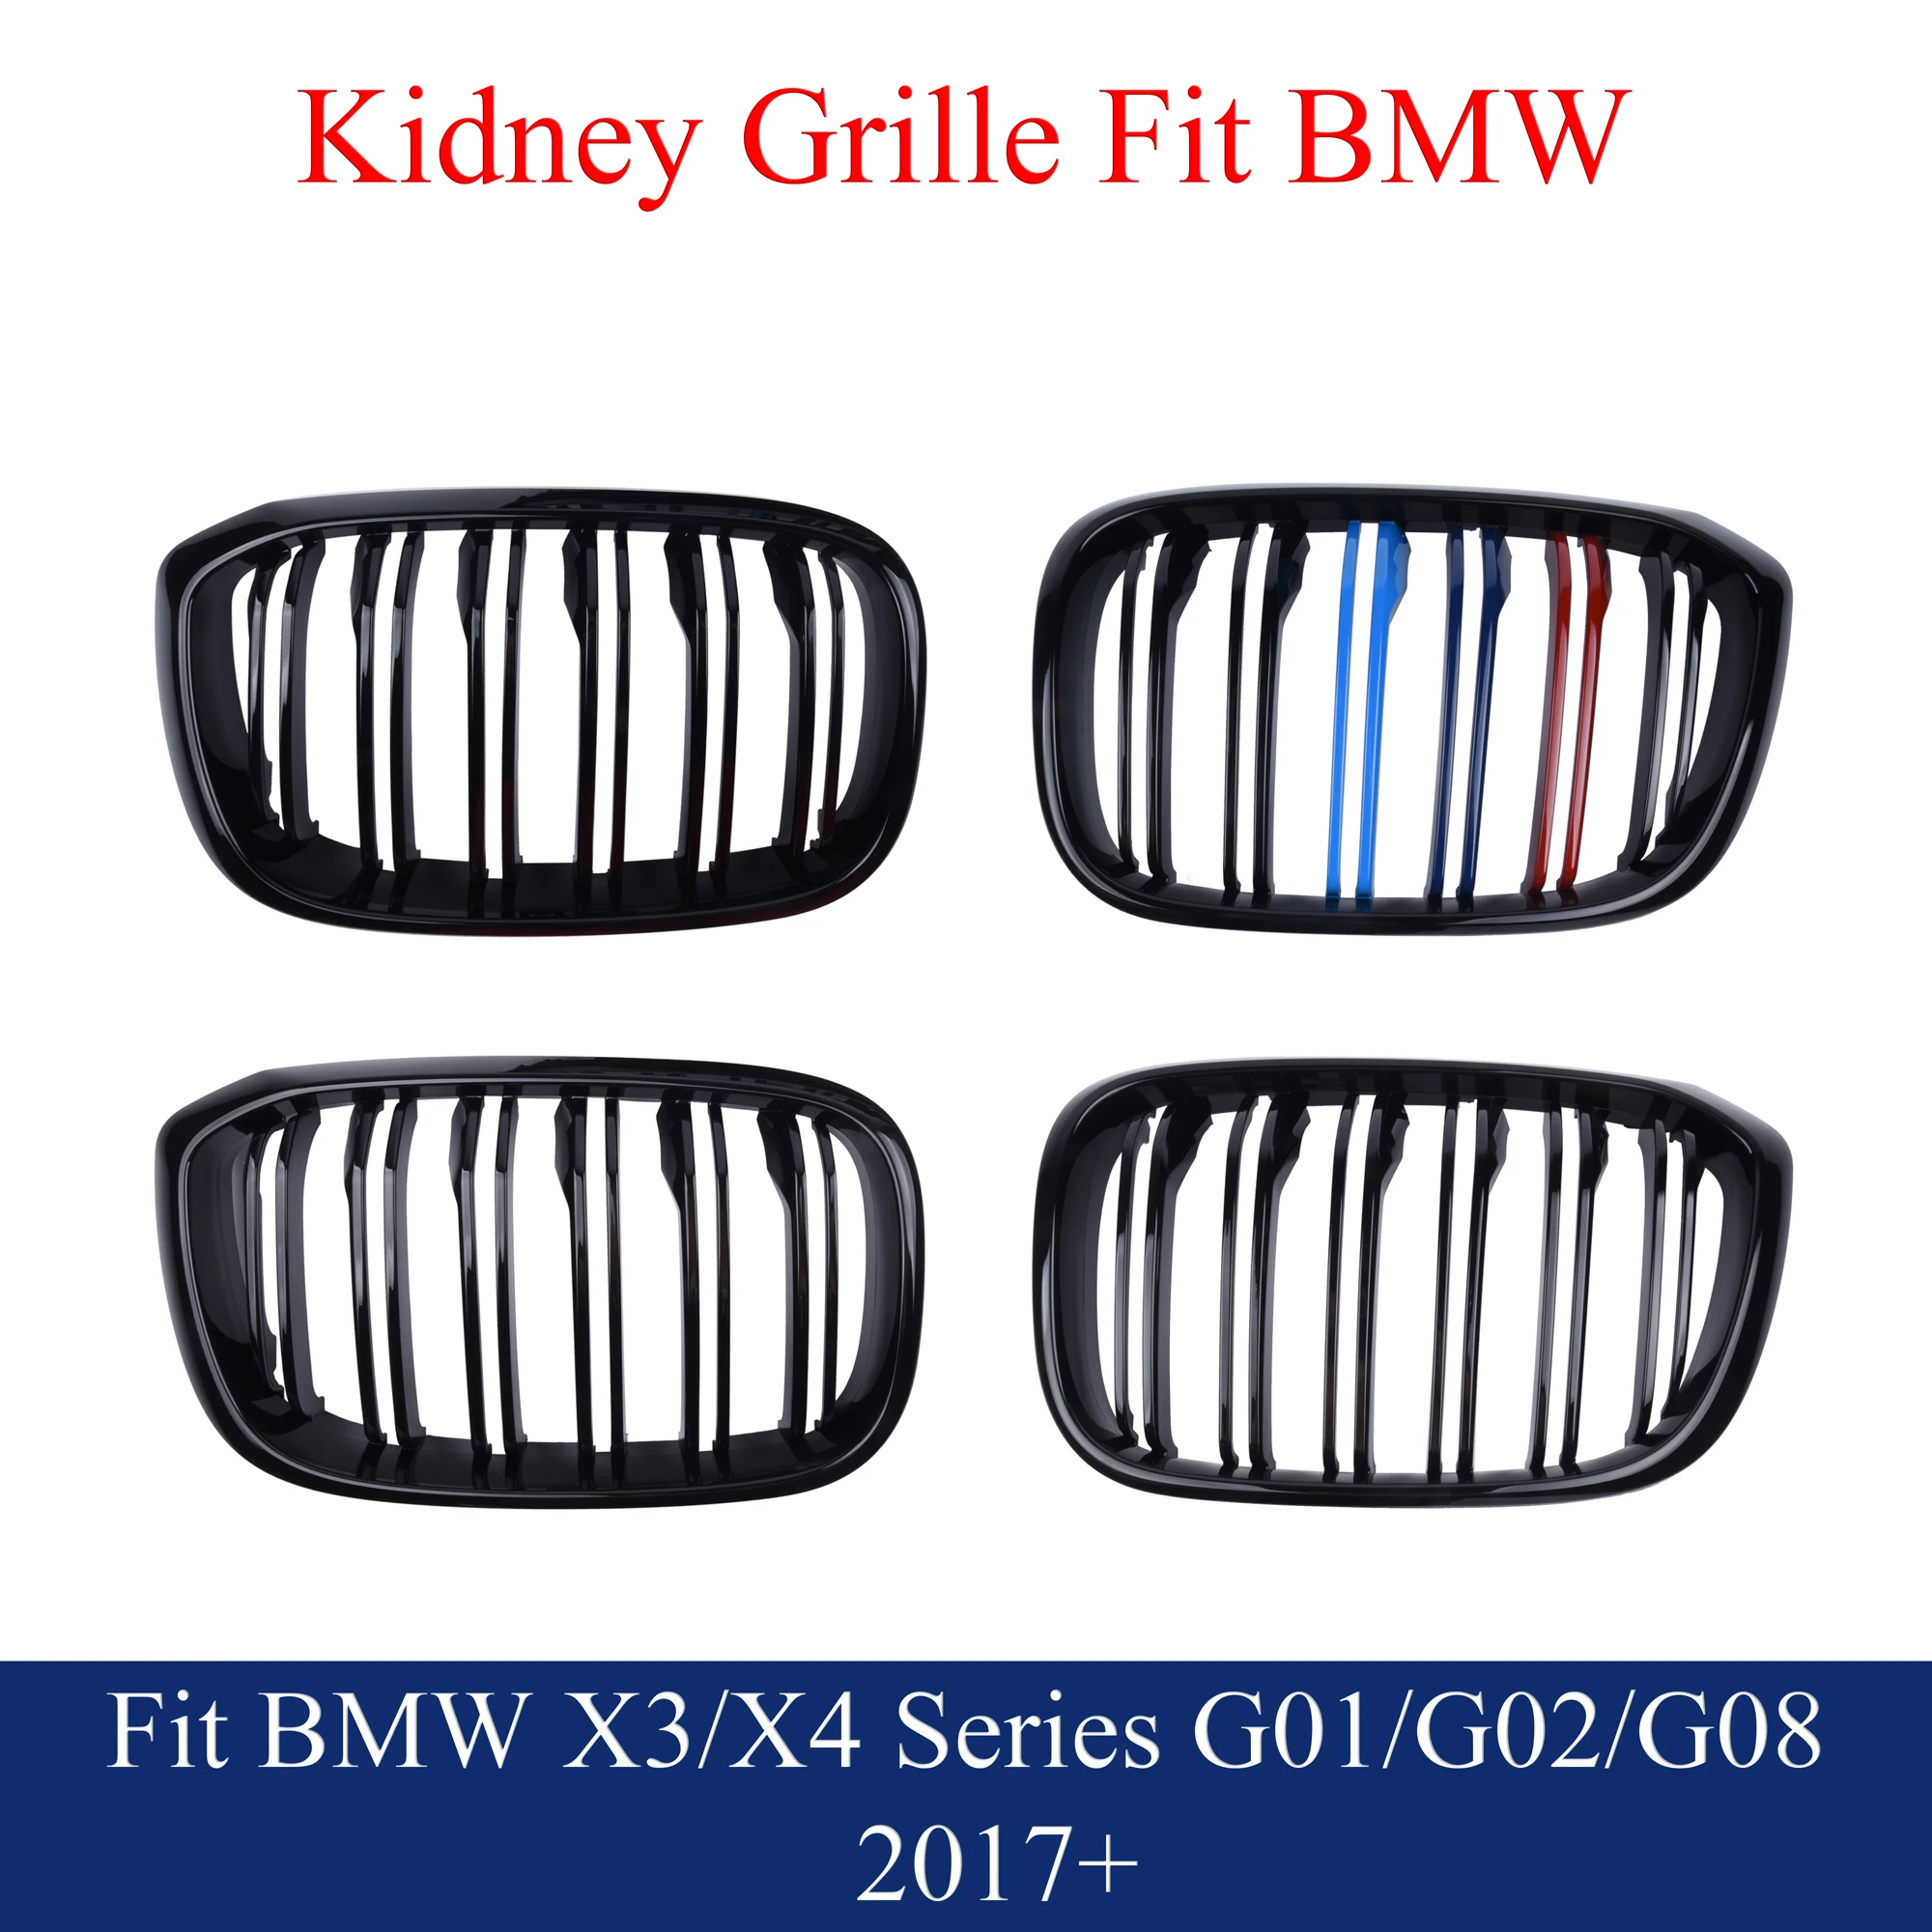 Front Kidney Grill Gloss Black M Color Fit  2017+ BMW X3 G01 X4 G02 SeriessDrive20i 18d xDrive20i 28i 30i 20d 25d 30d